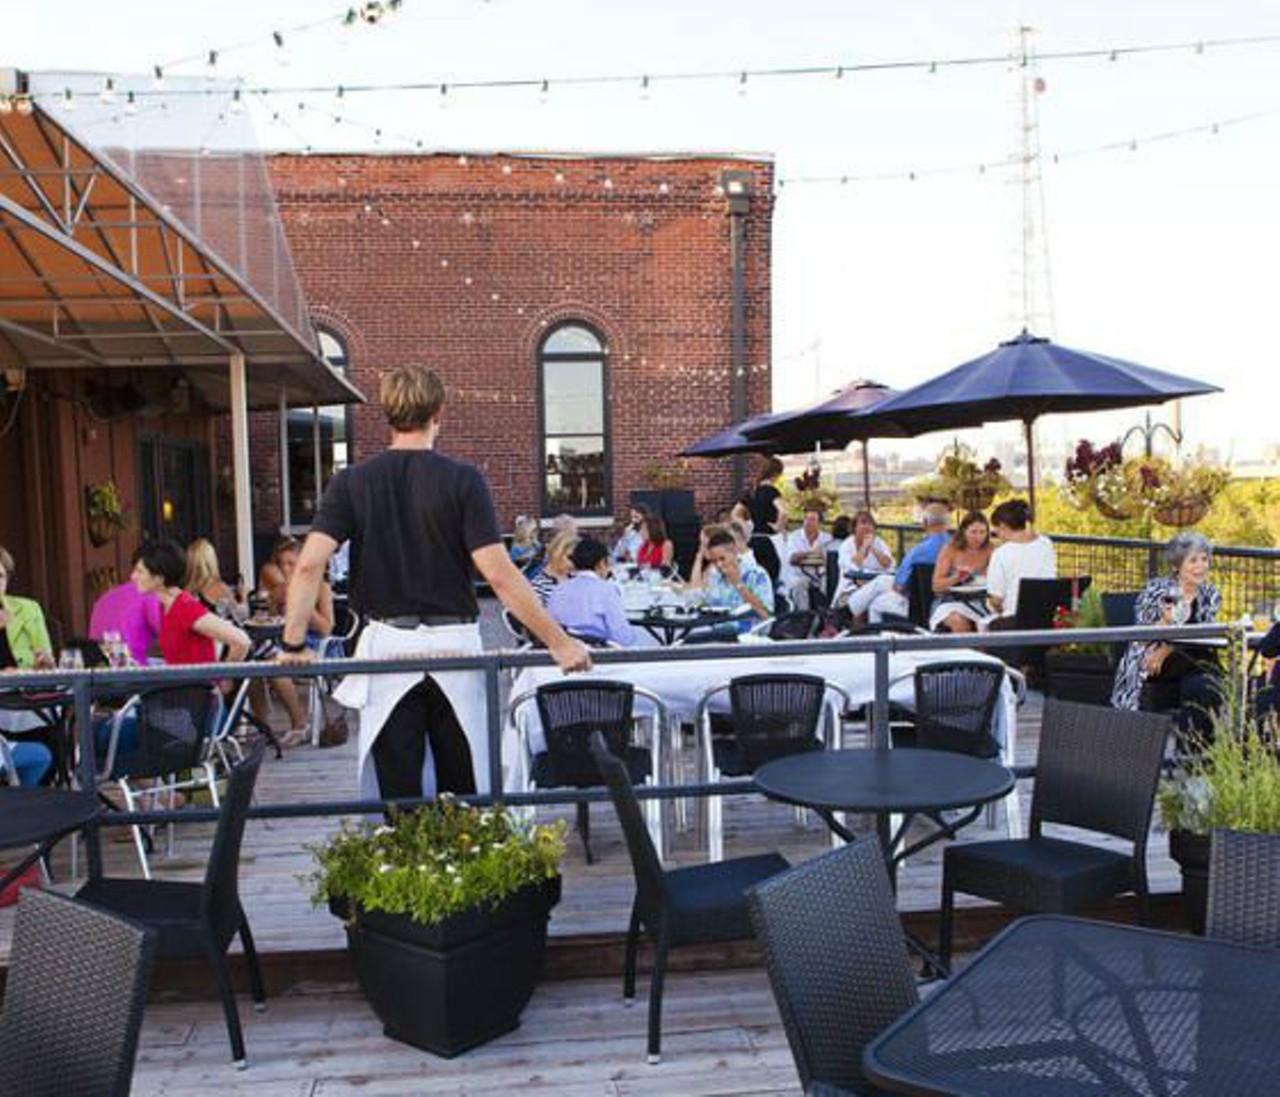 Vin de Set
2017 Chouteau Ave. 
St. Louis, MO 63103
(314) 241-8989
What better place to do some day drinking than on a rooftop? Those who don't dig dive bar atmospheres can find a more upscale place to drink at Vin de Set, home to French cuisine, a full bar and one of the best rooftop patios in the city. Bar hours vary by the day, but Tuesday through Friday it opens at 11 a.m., and on Sunday it opens at 2 p.m. -- meaning you can relax with your drink with plenty of daylight to boot. Photo by Laura Miller.